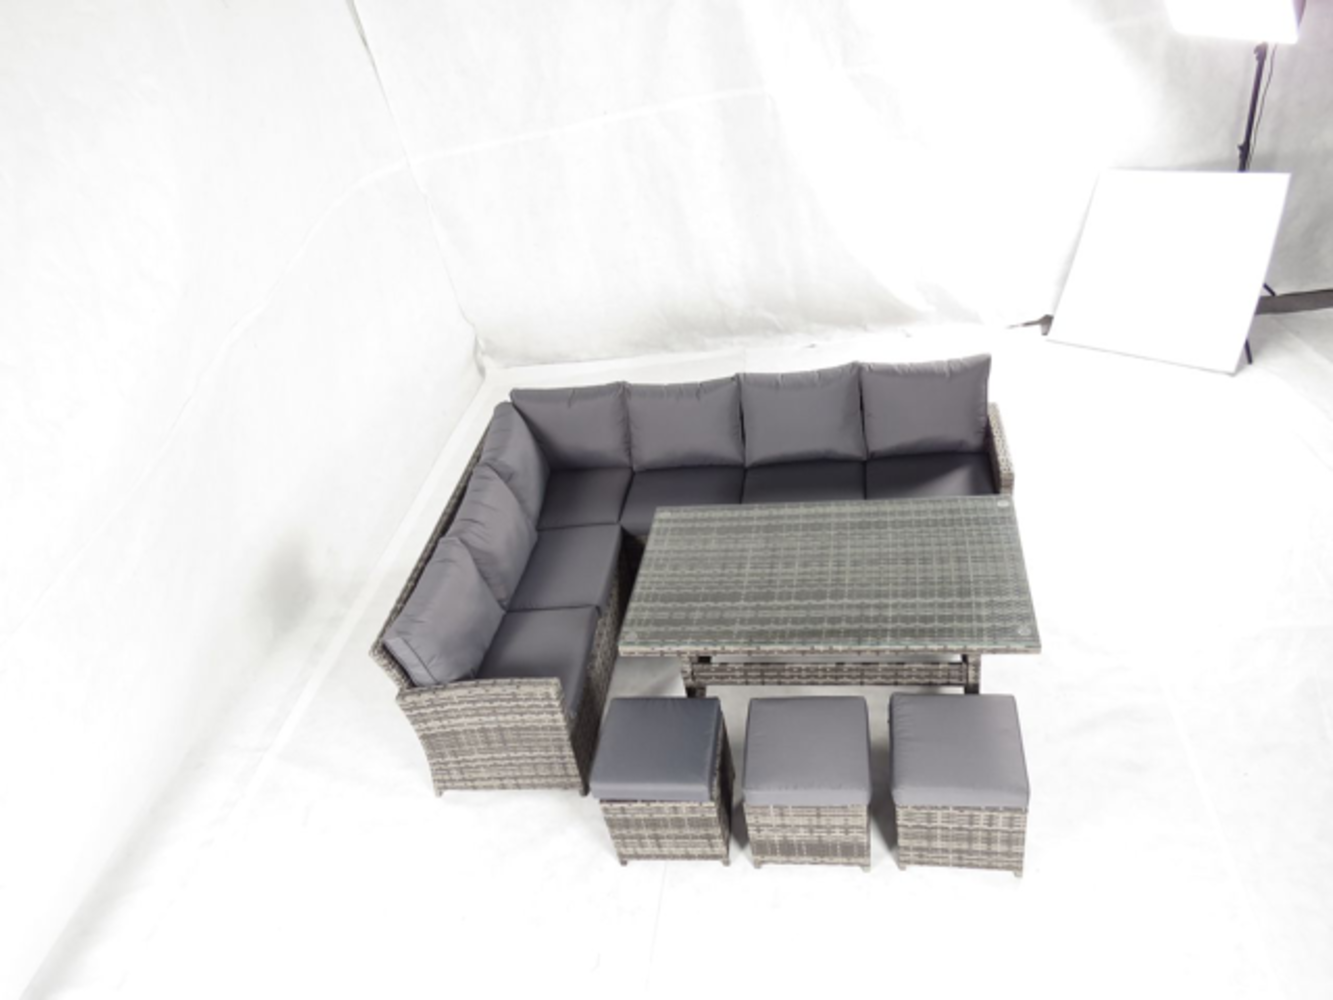 LUXURY 10 SEAT RATTAN OUTDOOR GARDEN SETS WITH CORNER SOFA, DINING TABLE AND FOOTSTOOLS. SOLD IN TRADE AND INDIVIDUAL LOTS